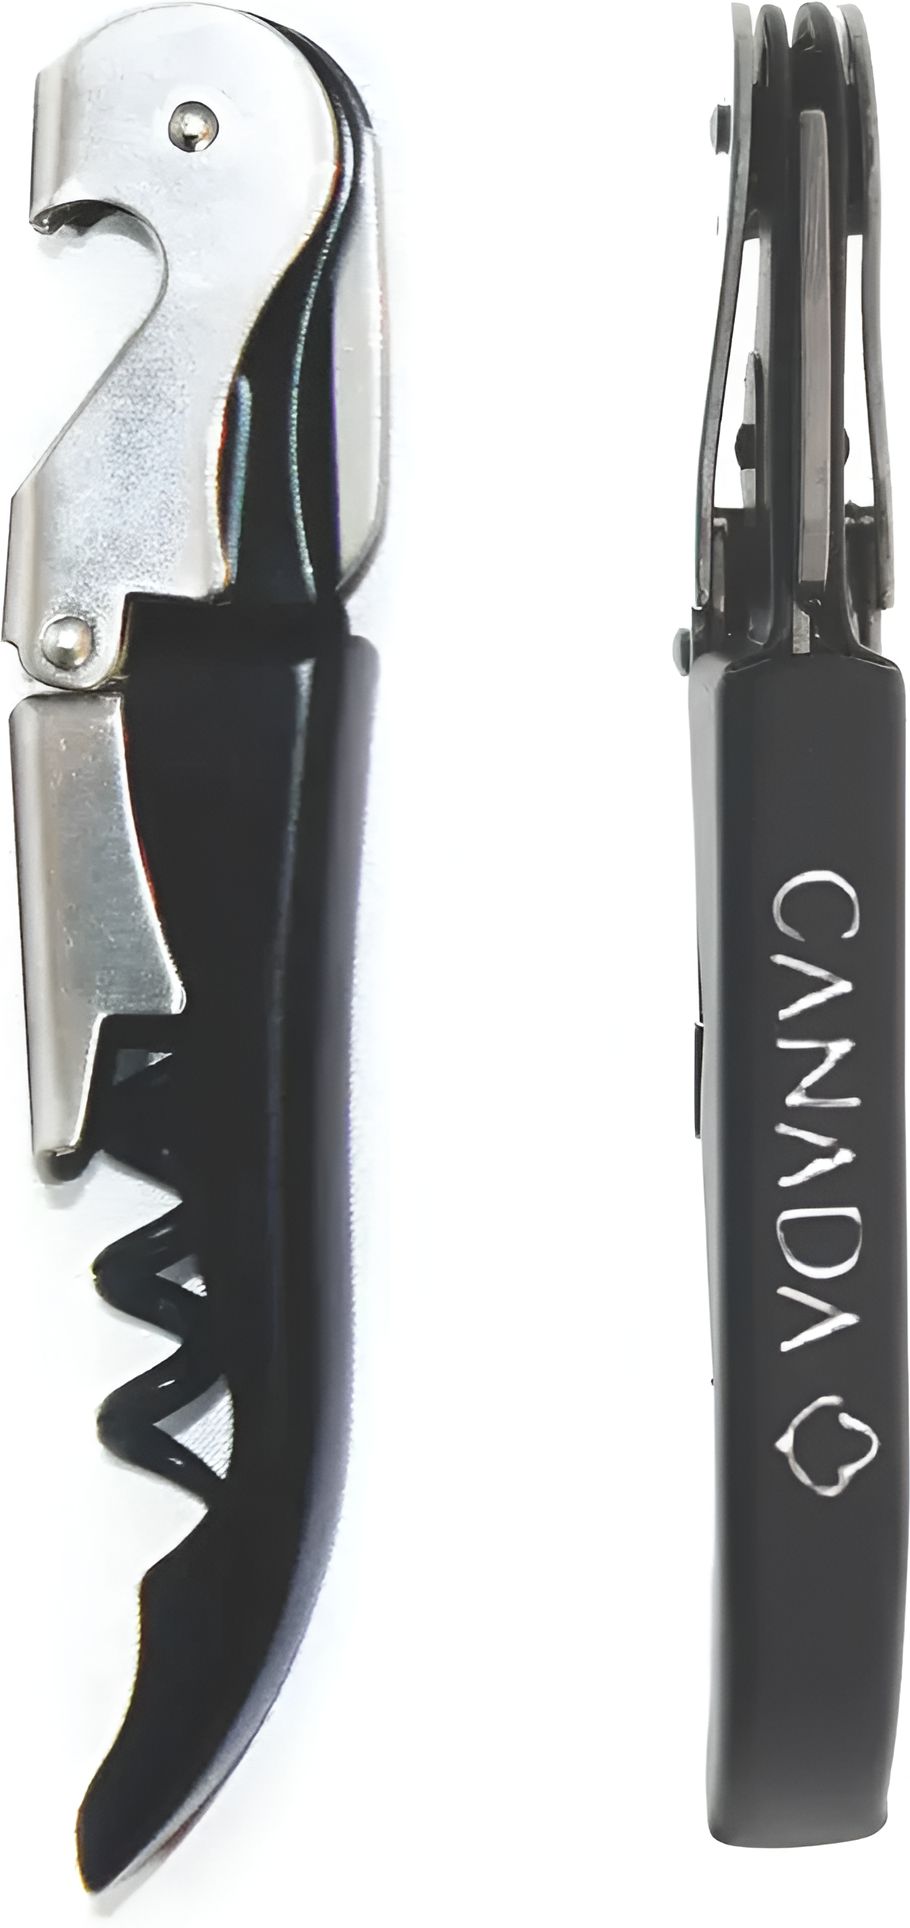 Cuisivin - Black with white print Canada Corkscrew - 4026CAN